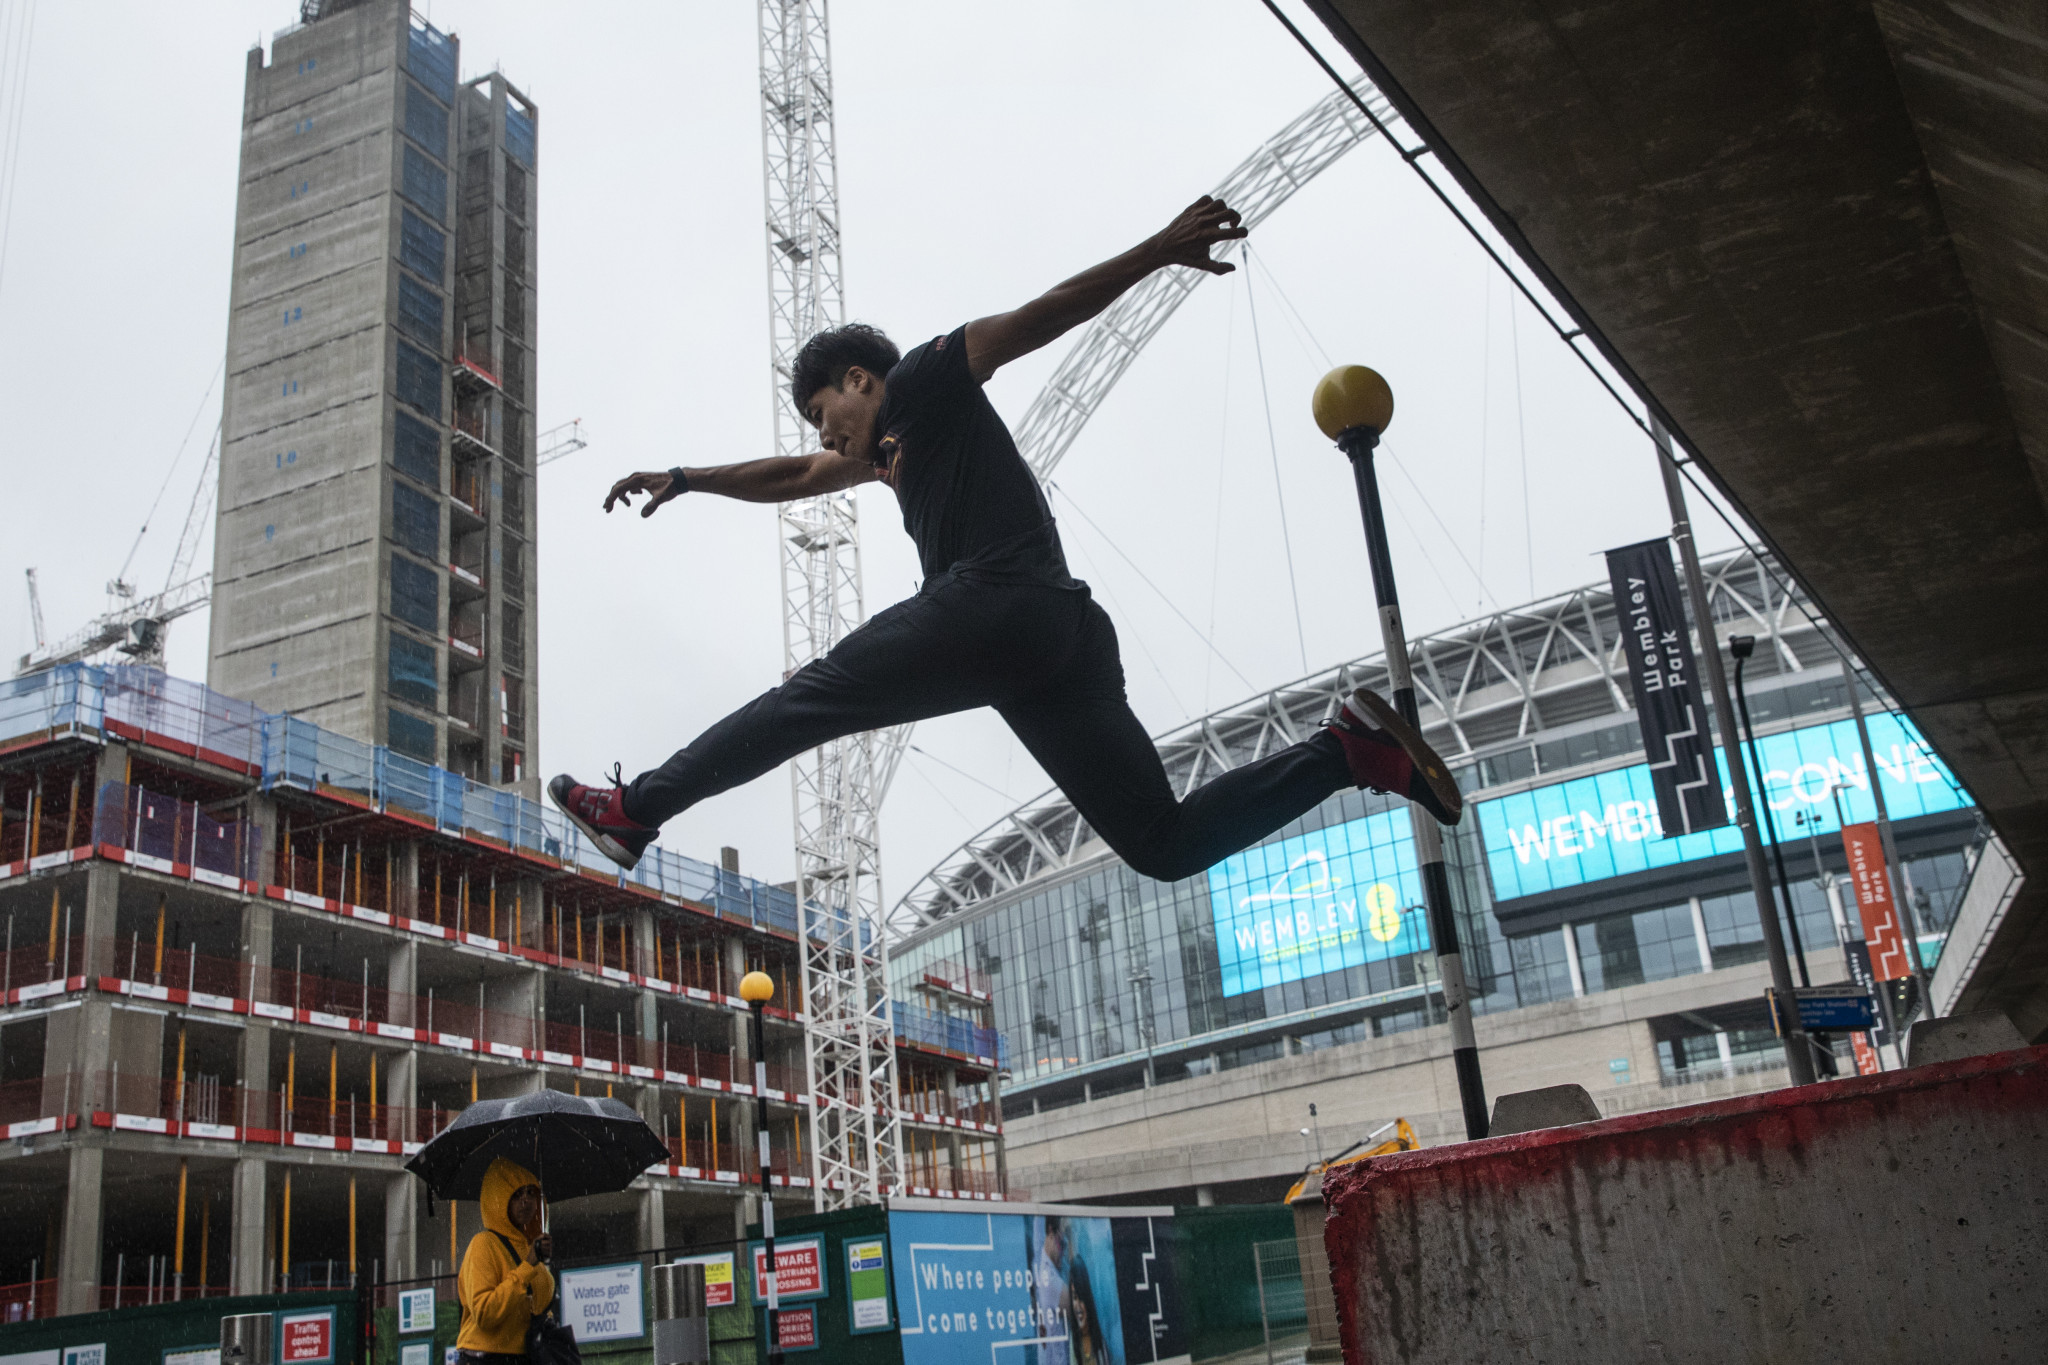 IPF and World OCR will look to develop parkour, ninja competitions, obstacle course racing and adventure racing together ©Getty Images